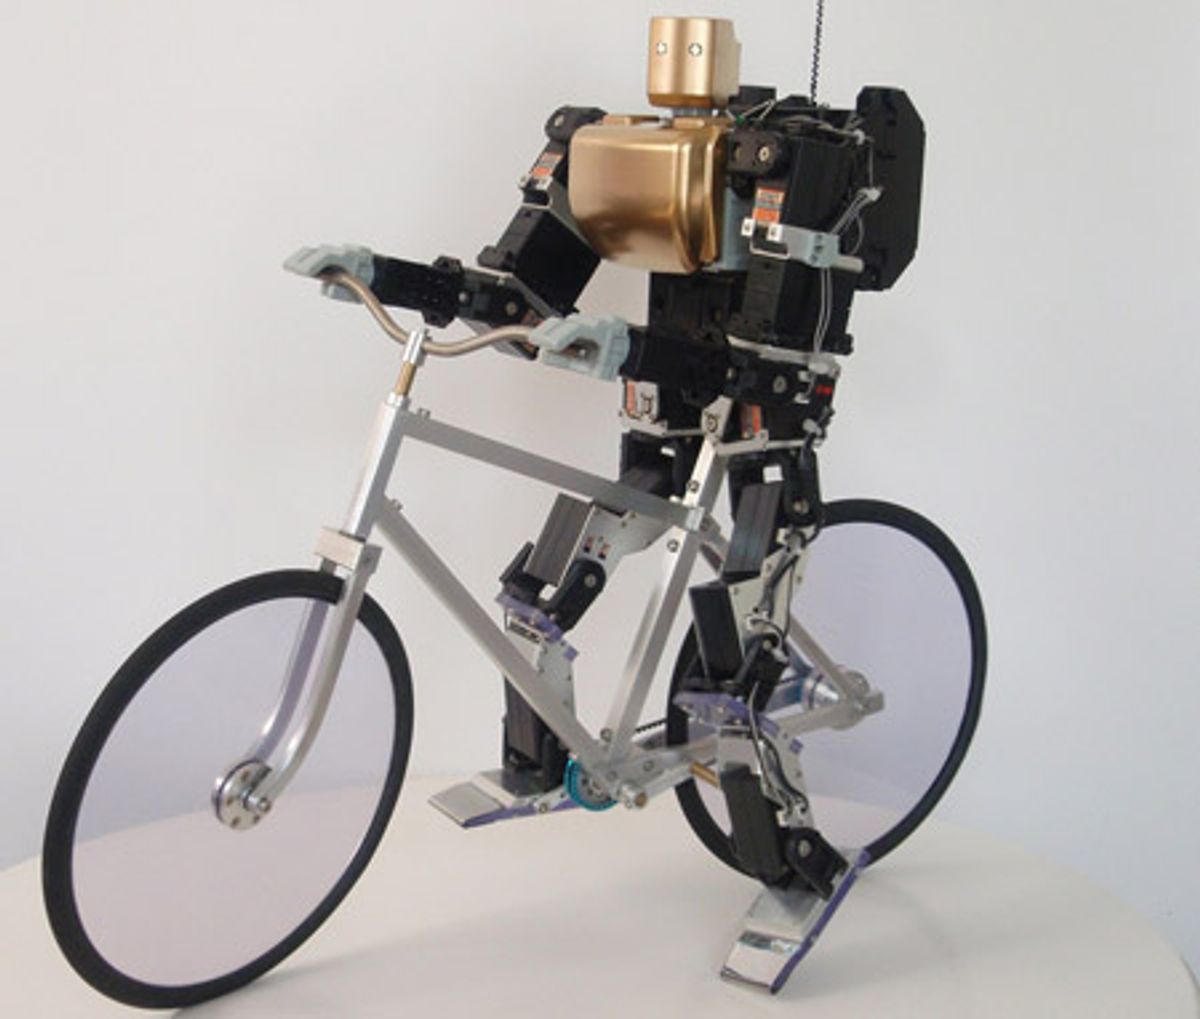 Hobby Robot Rides a Bike the Old-Fashioned Way